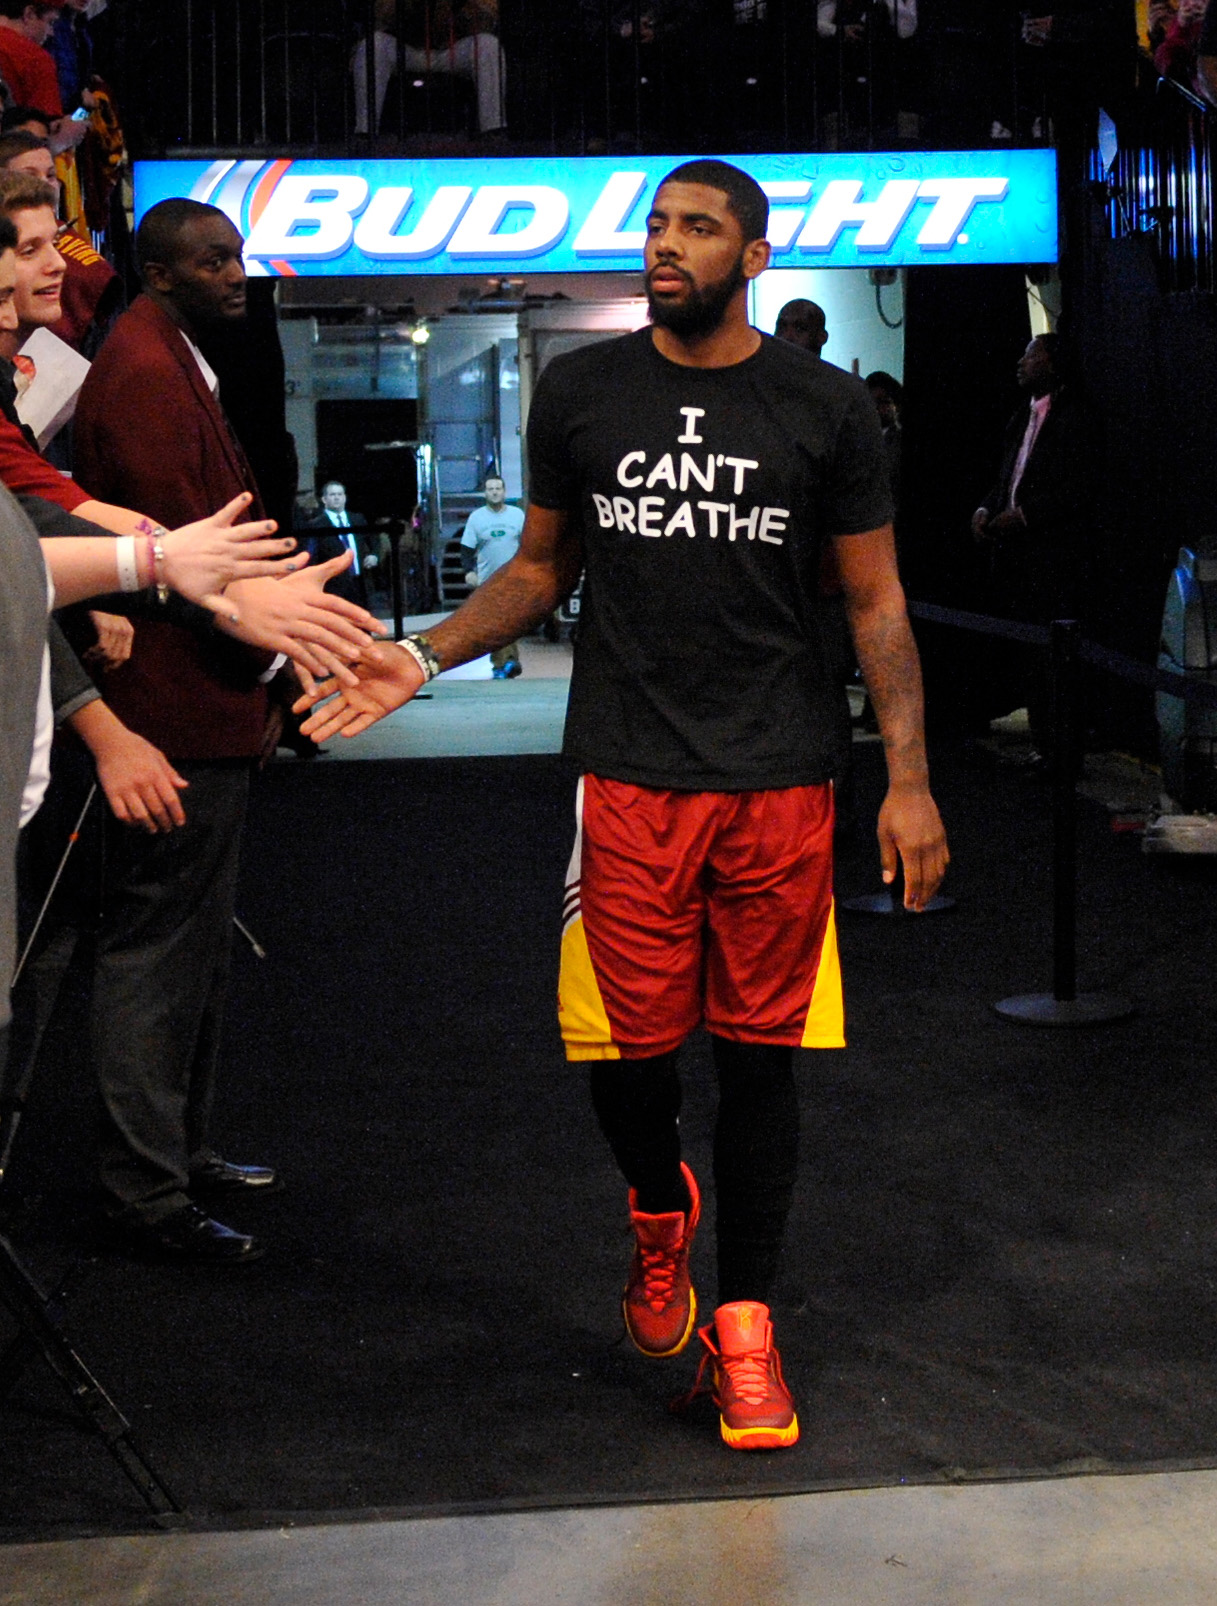 LeBron James wears I Can't Breathe shirt at NBA game in New York